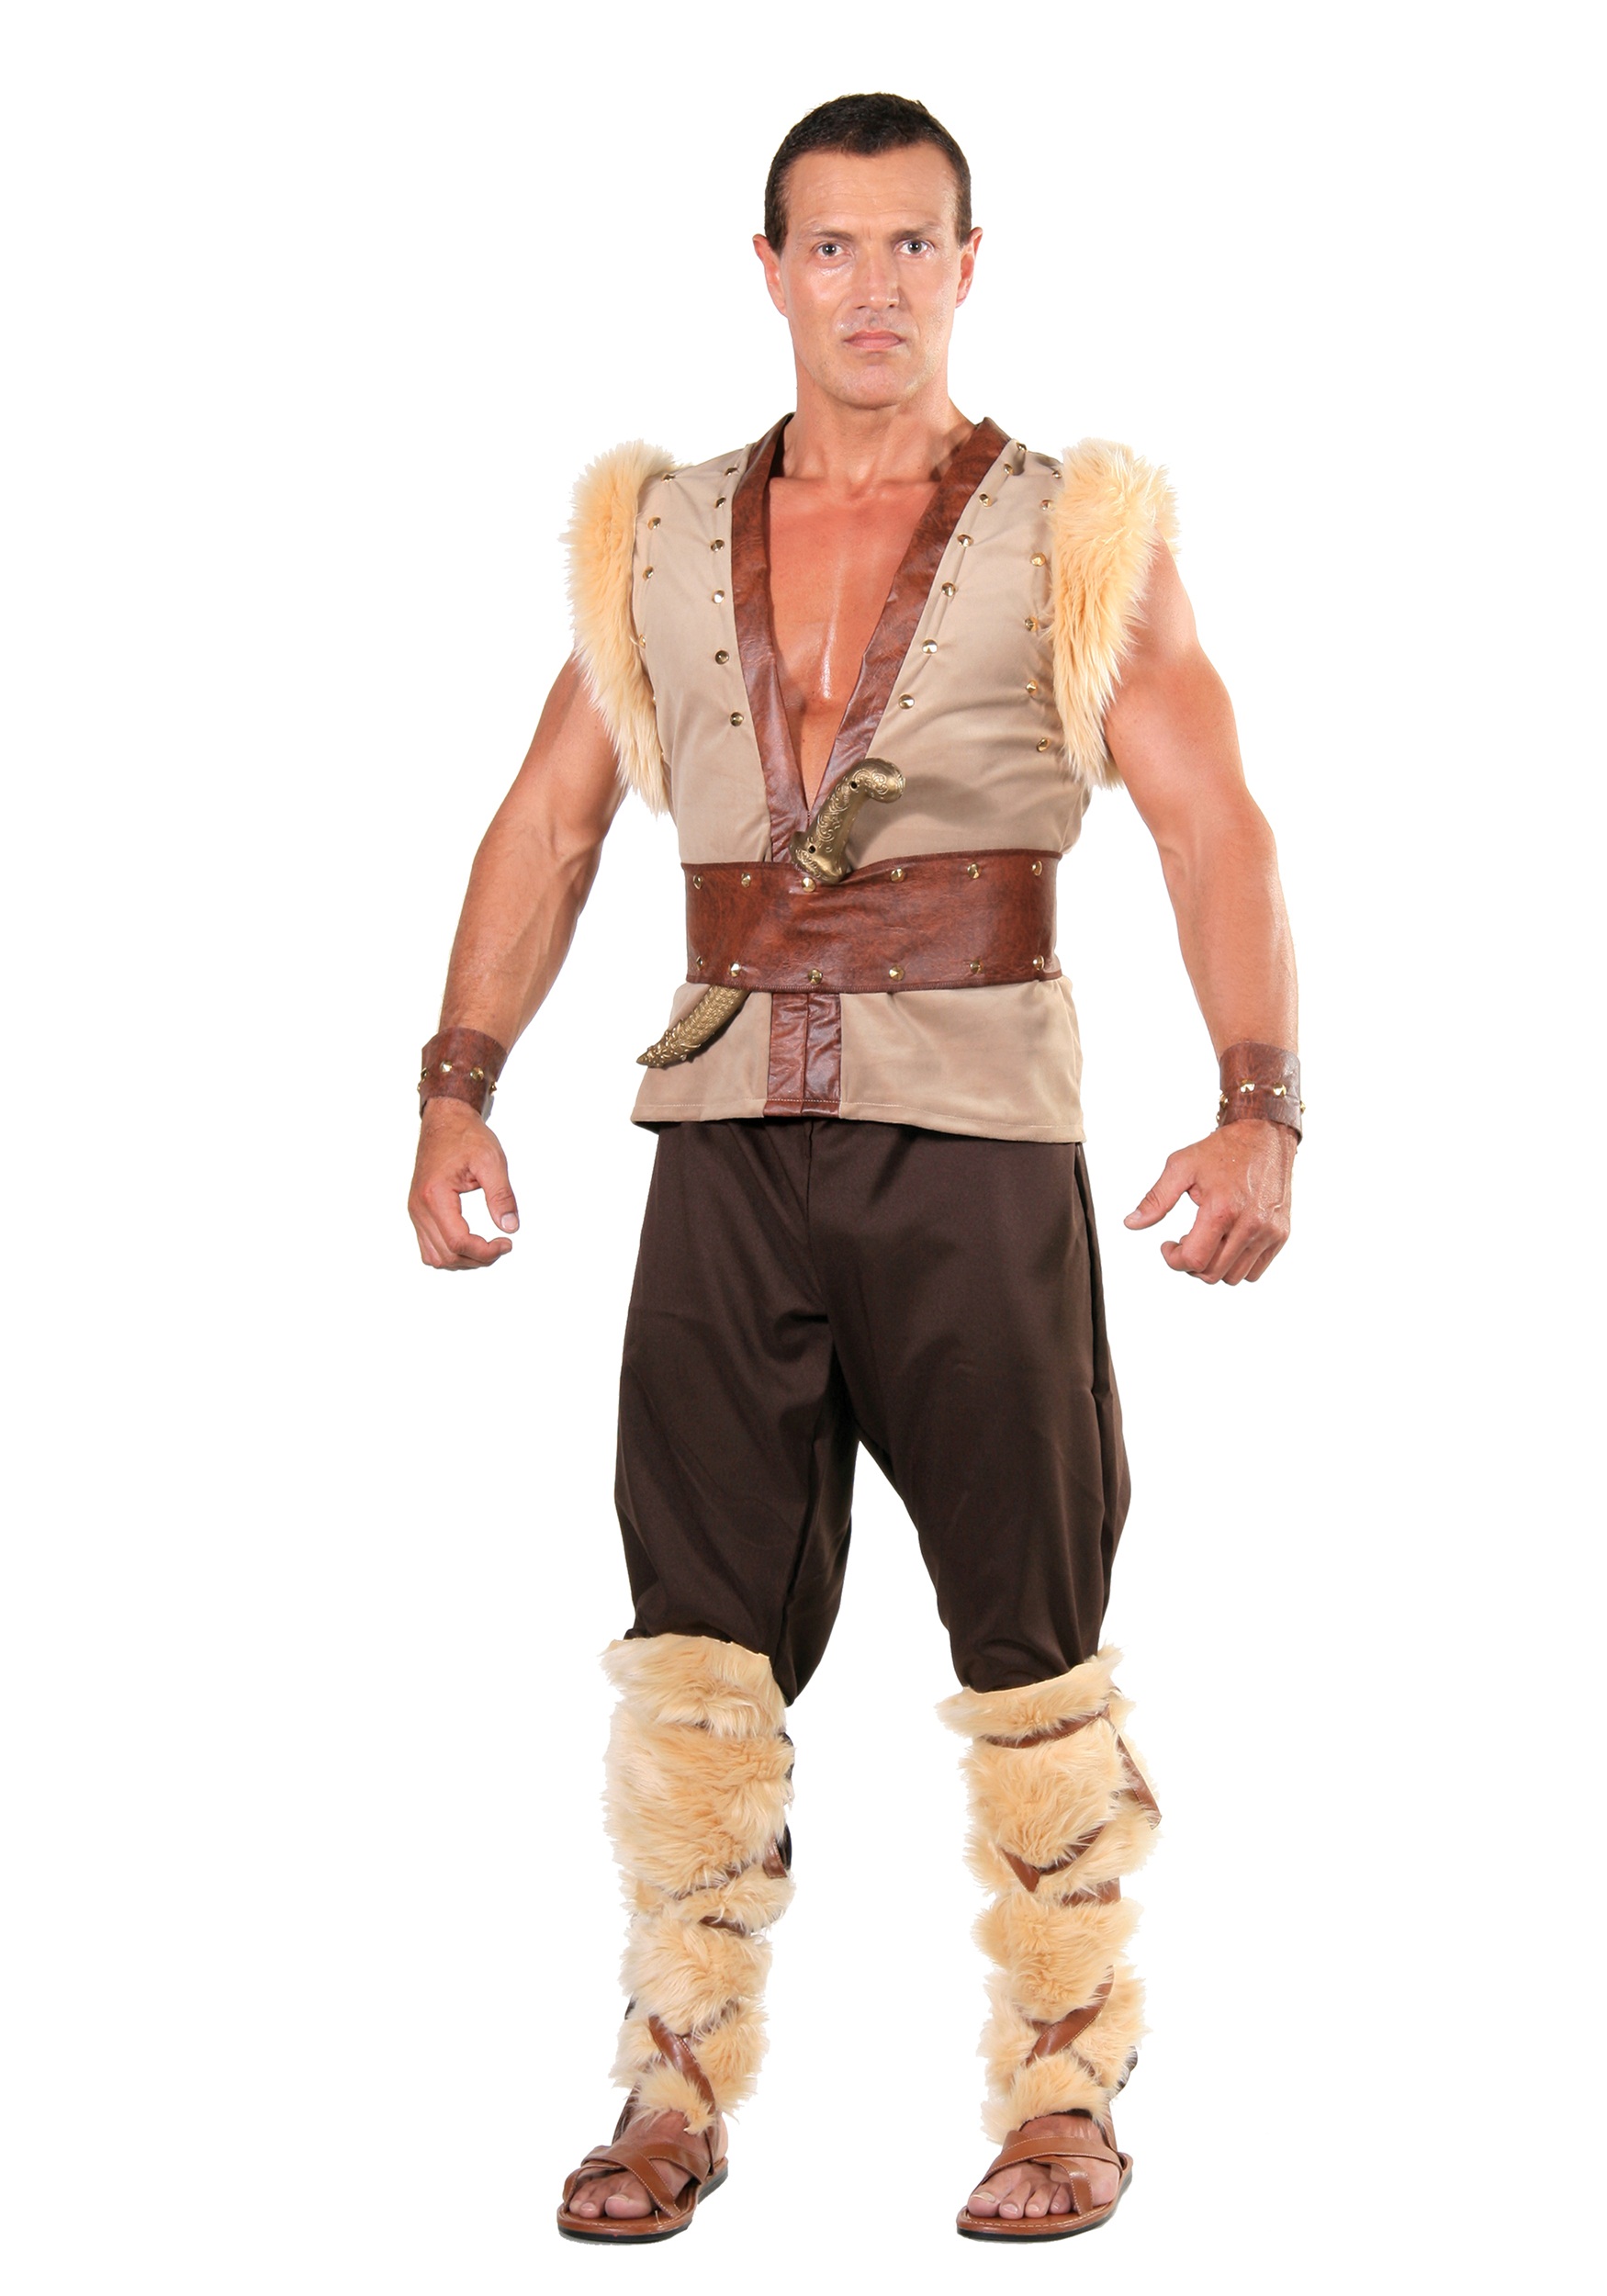 Norse God Thor Costume for Adults